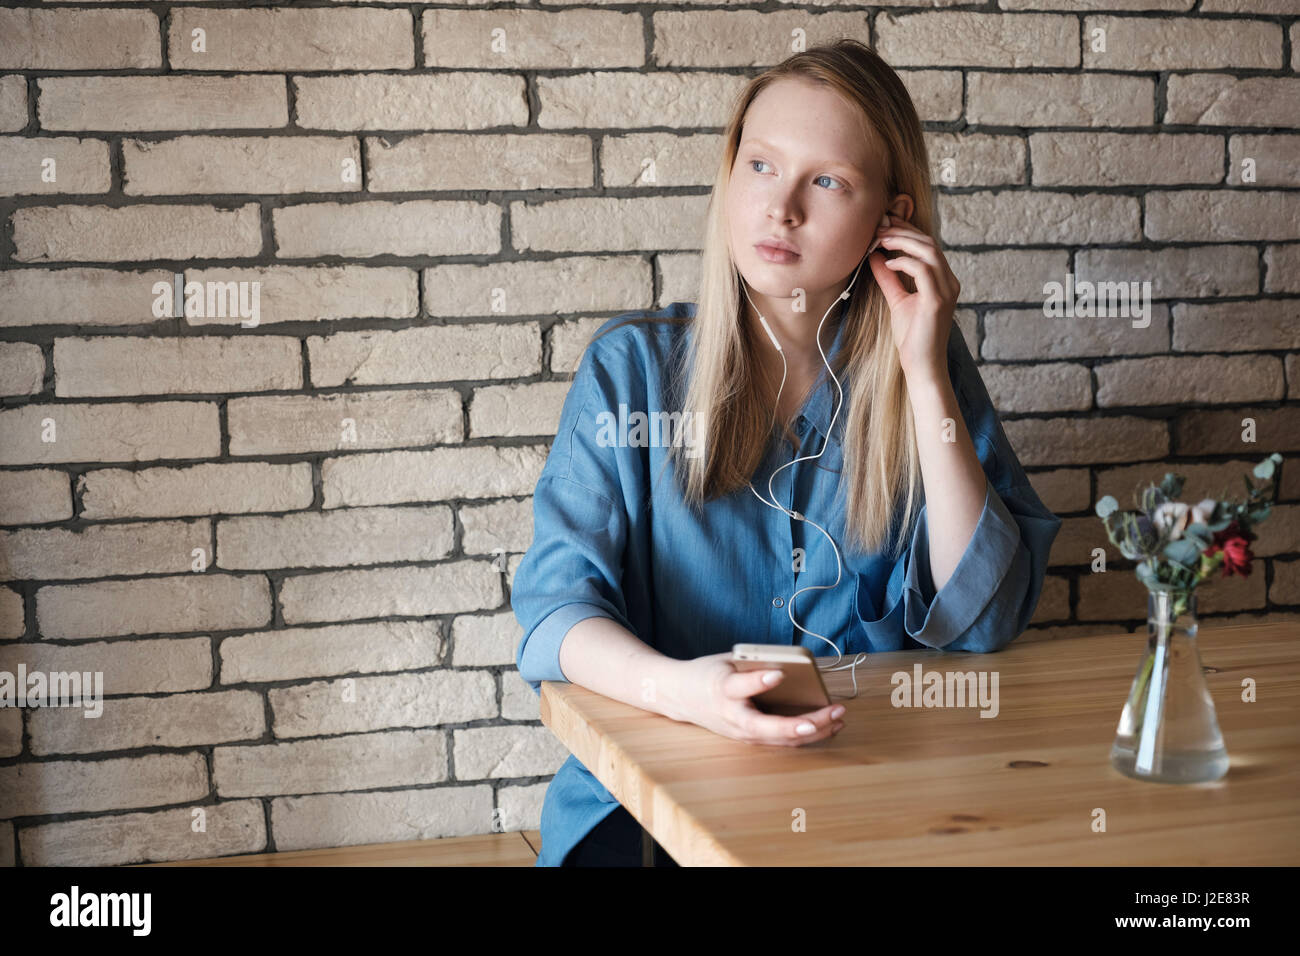 Beautiful casual blonde with a phone in her hand, touched the earpiece in the ear wearing in blue shirt at the cafe table. Copy space Stock Photo